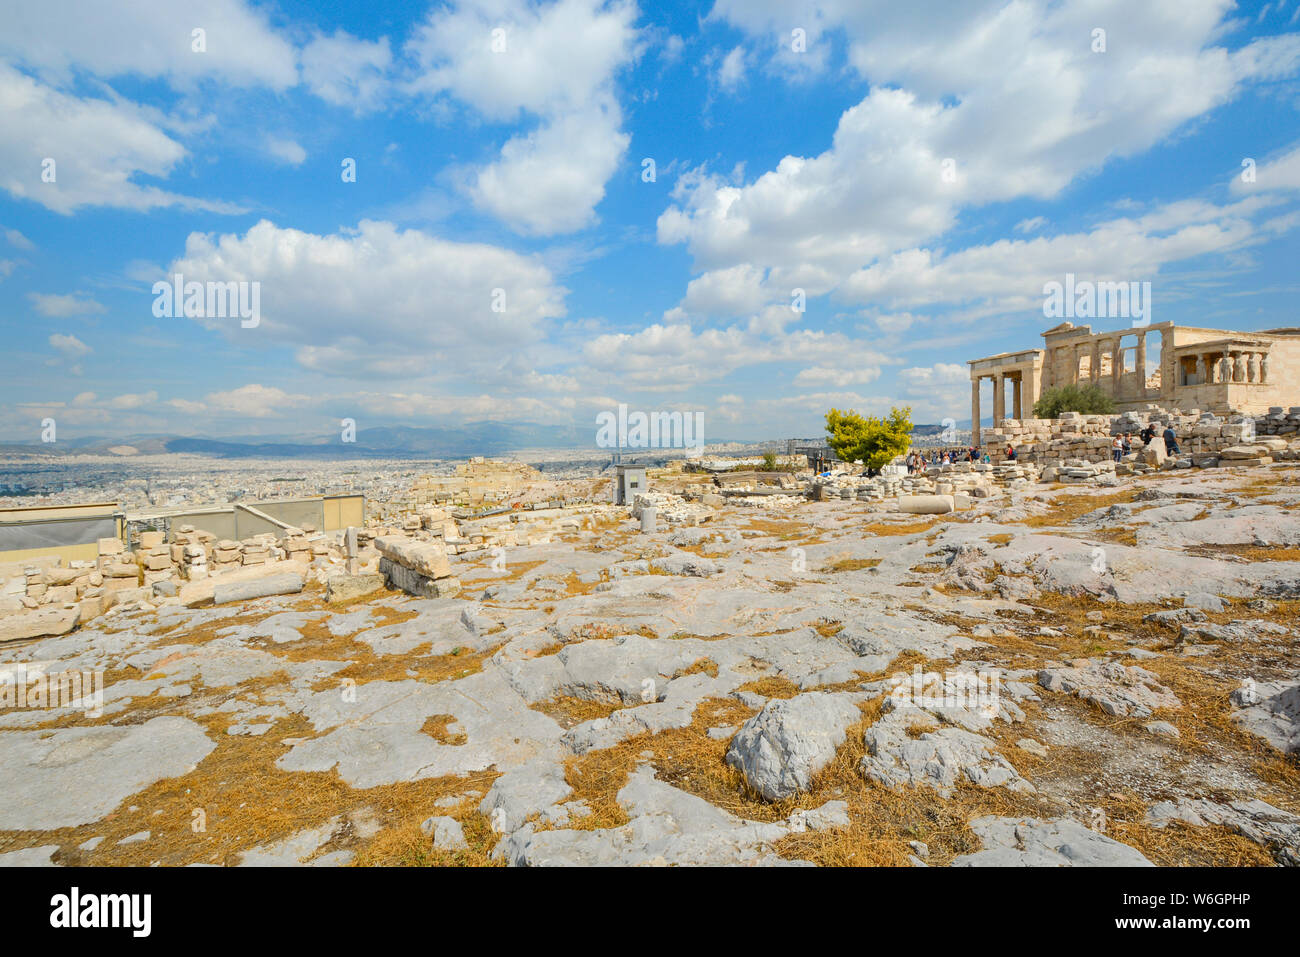 A warm summer day in Athens Greece as tourists enjoy the city view and explore the ancient Erechtheion on Acropolis Hill, a world heritage site Stock Photo